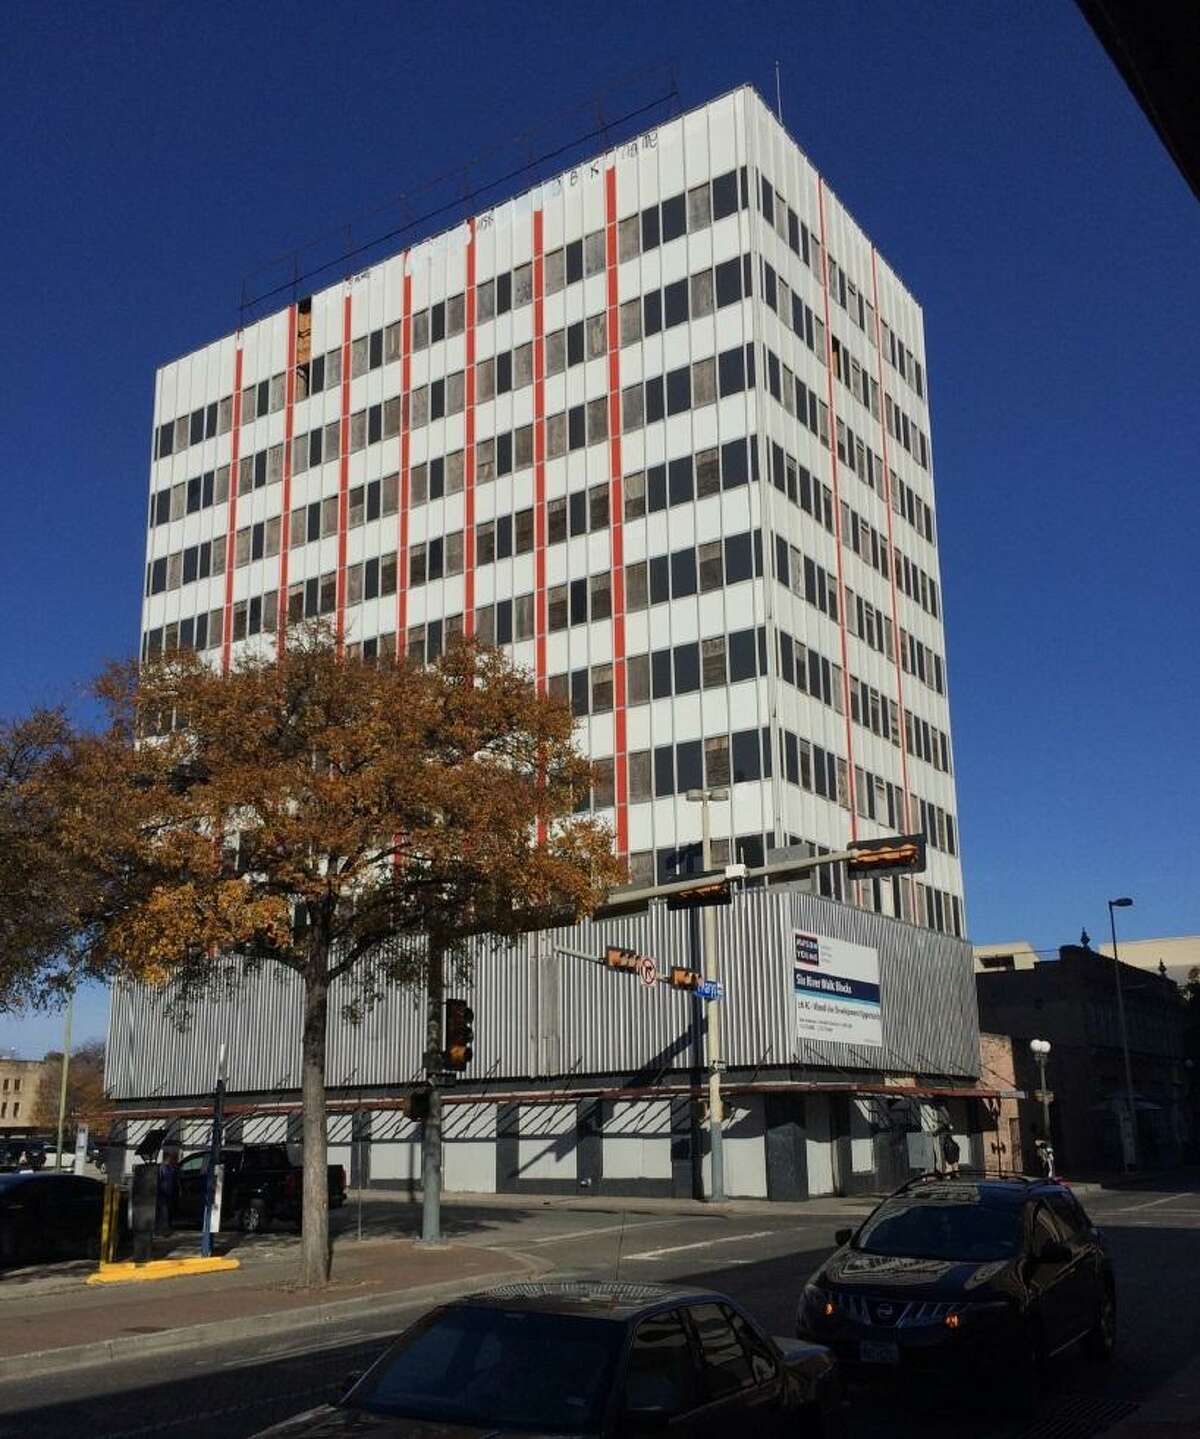 A local developer plans to rehabilitate a 10-story downtown building at 601 N. St. Mary’s St. into apartments.